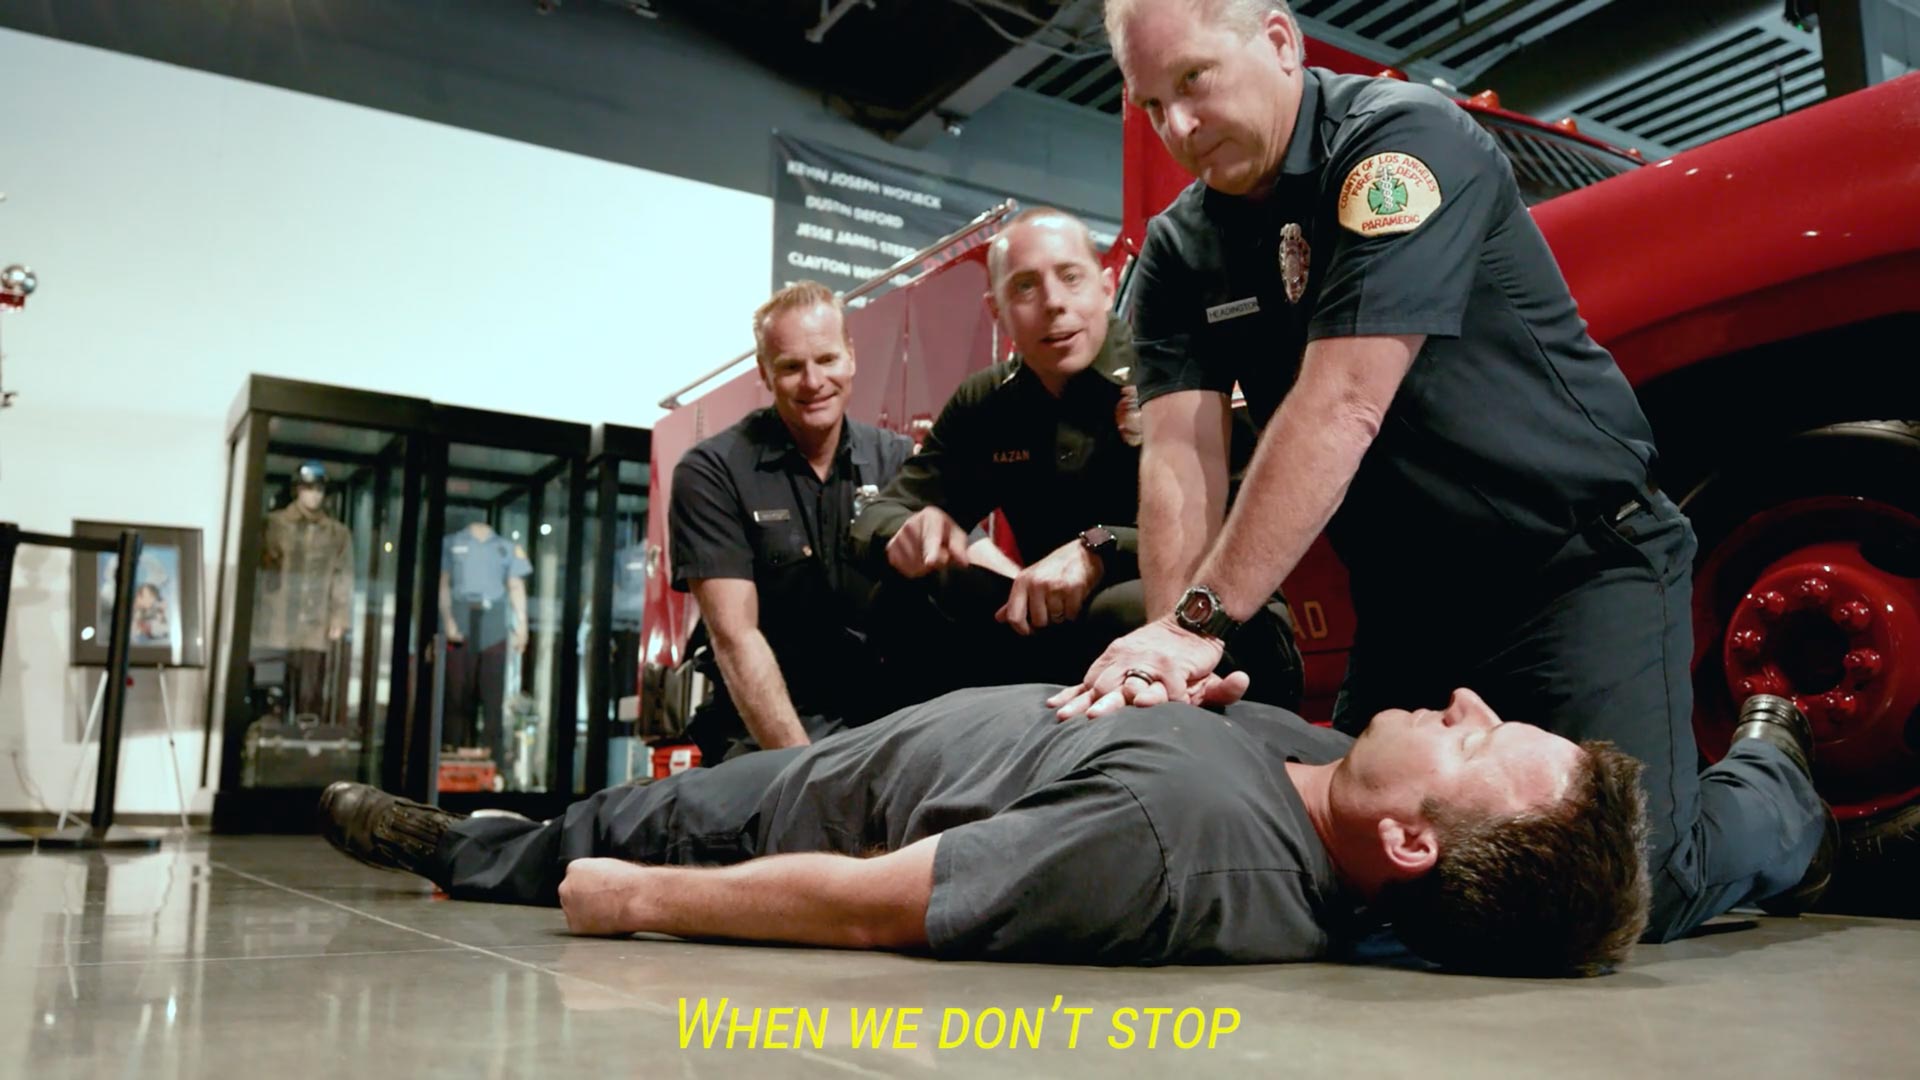 Fire fighter demonstrating CPR.